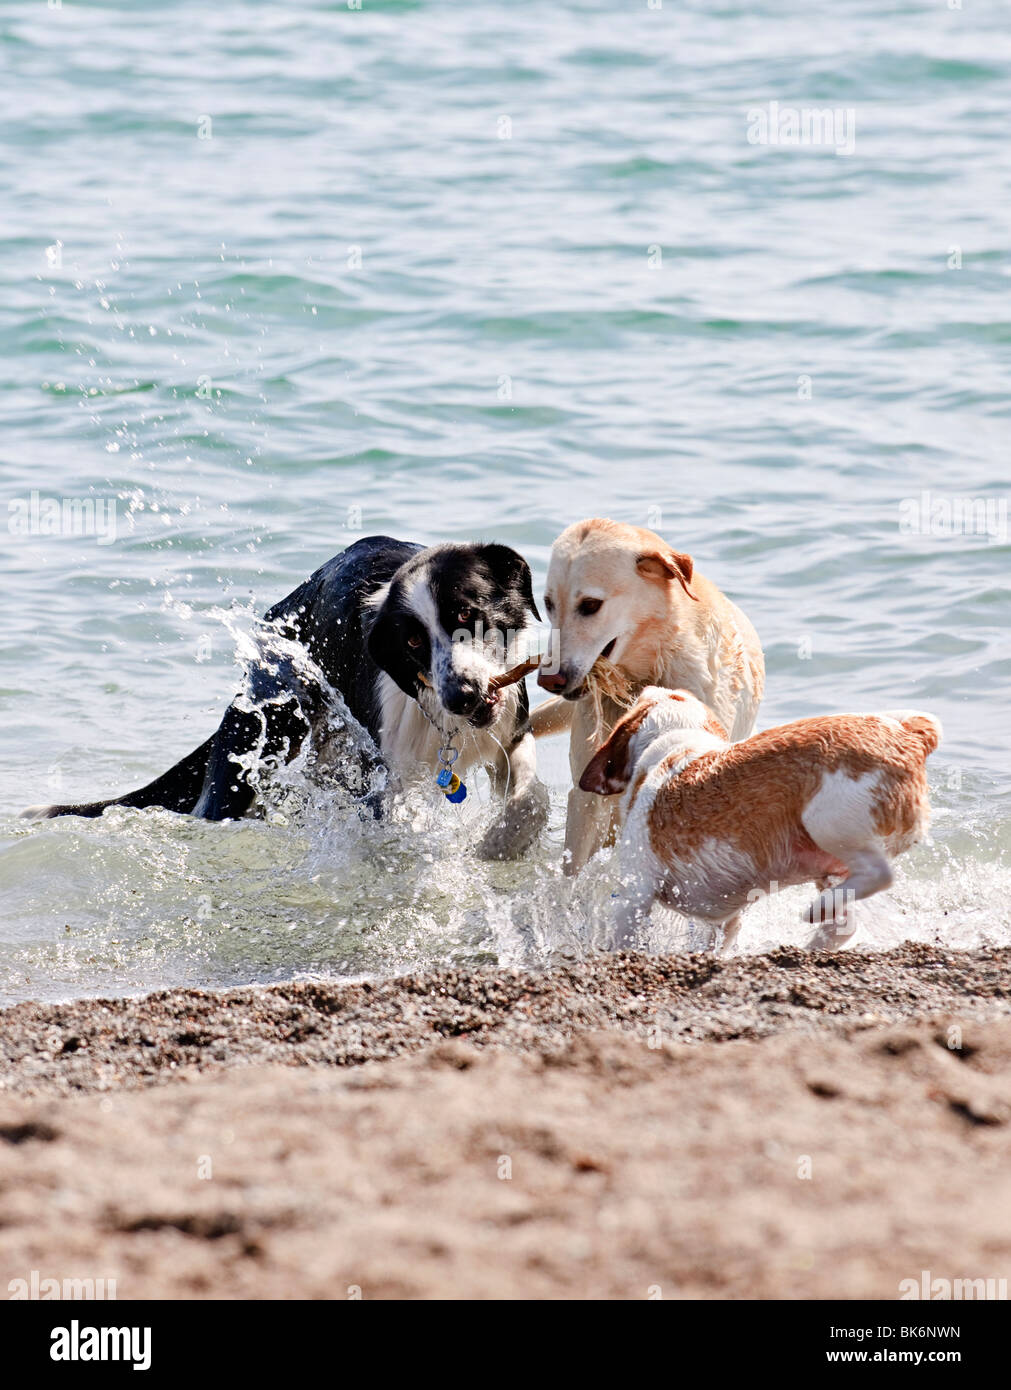 Three dogs playing and splashing in water at the beach Stock Photo